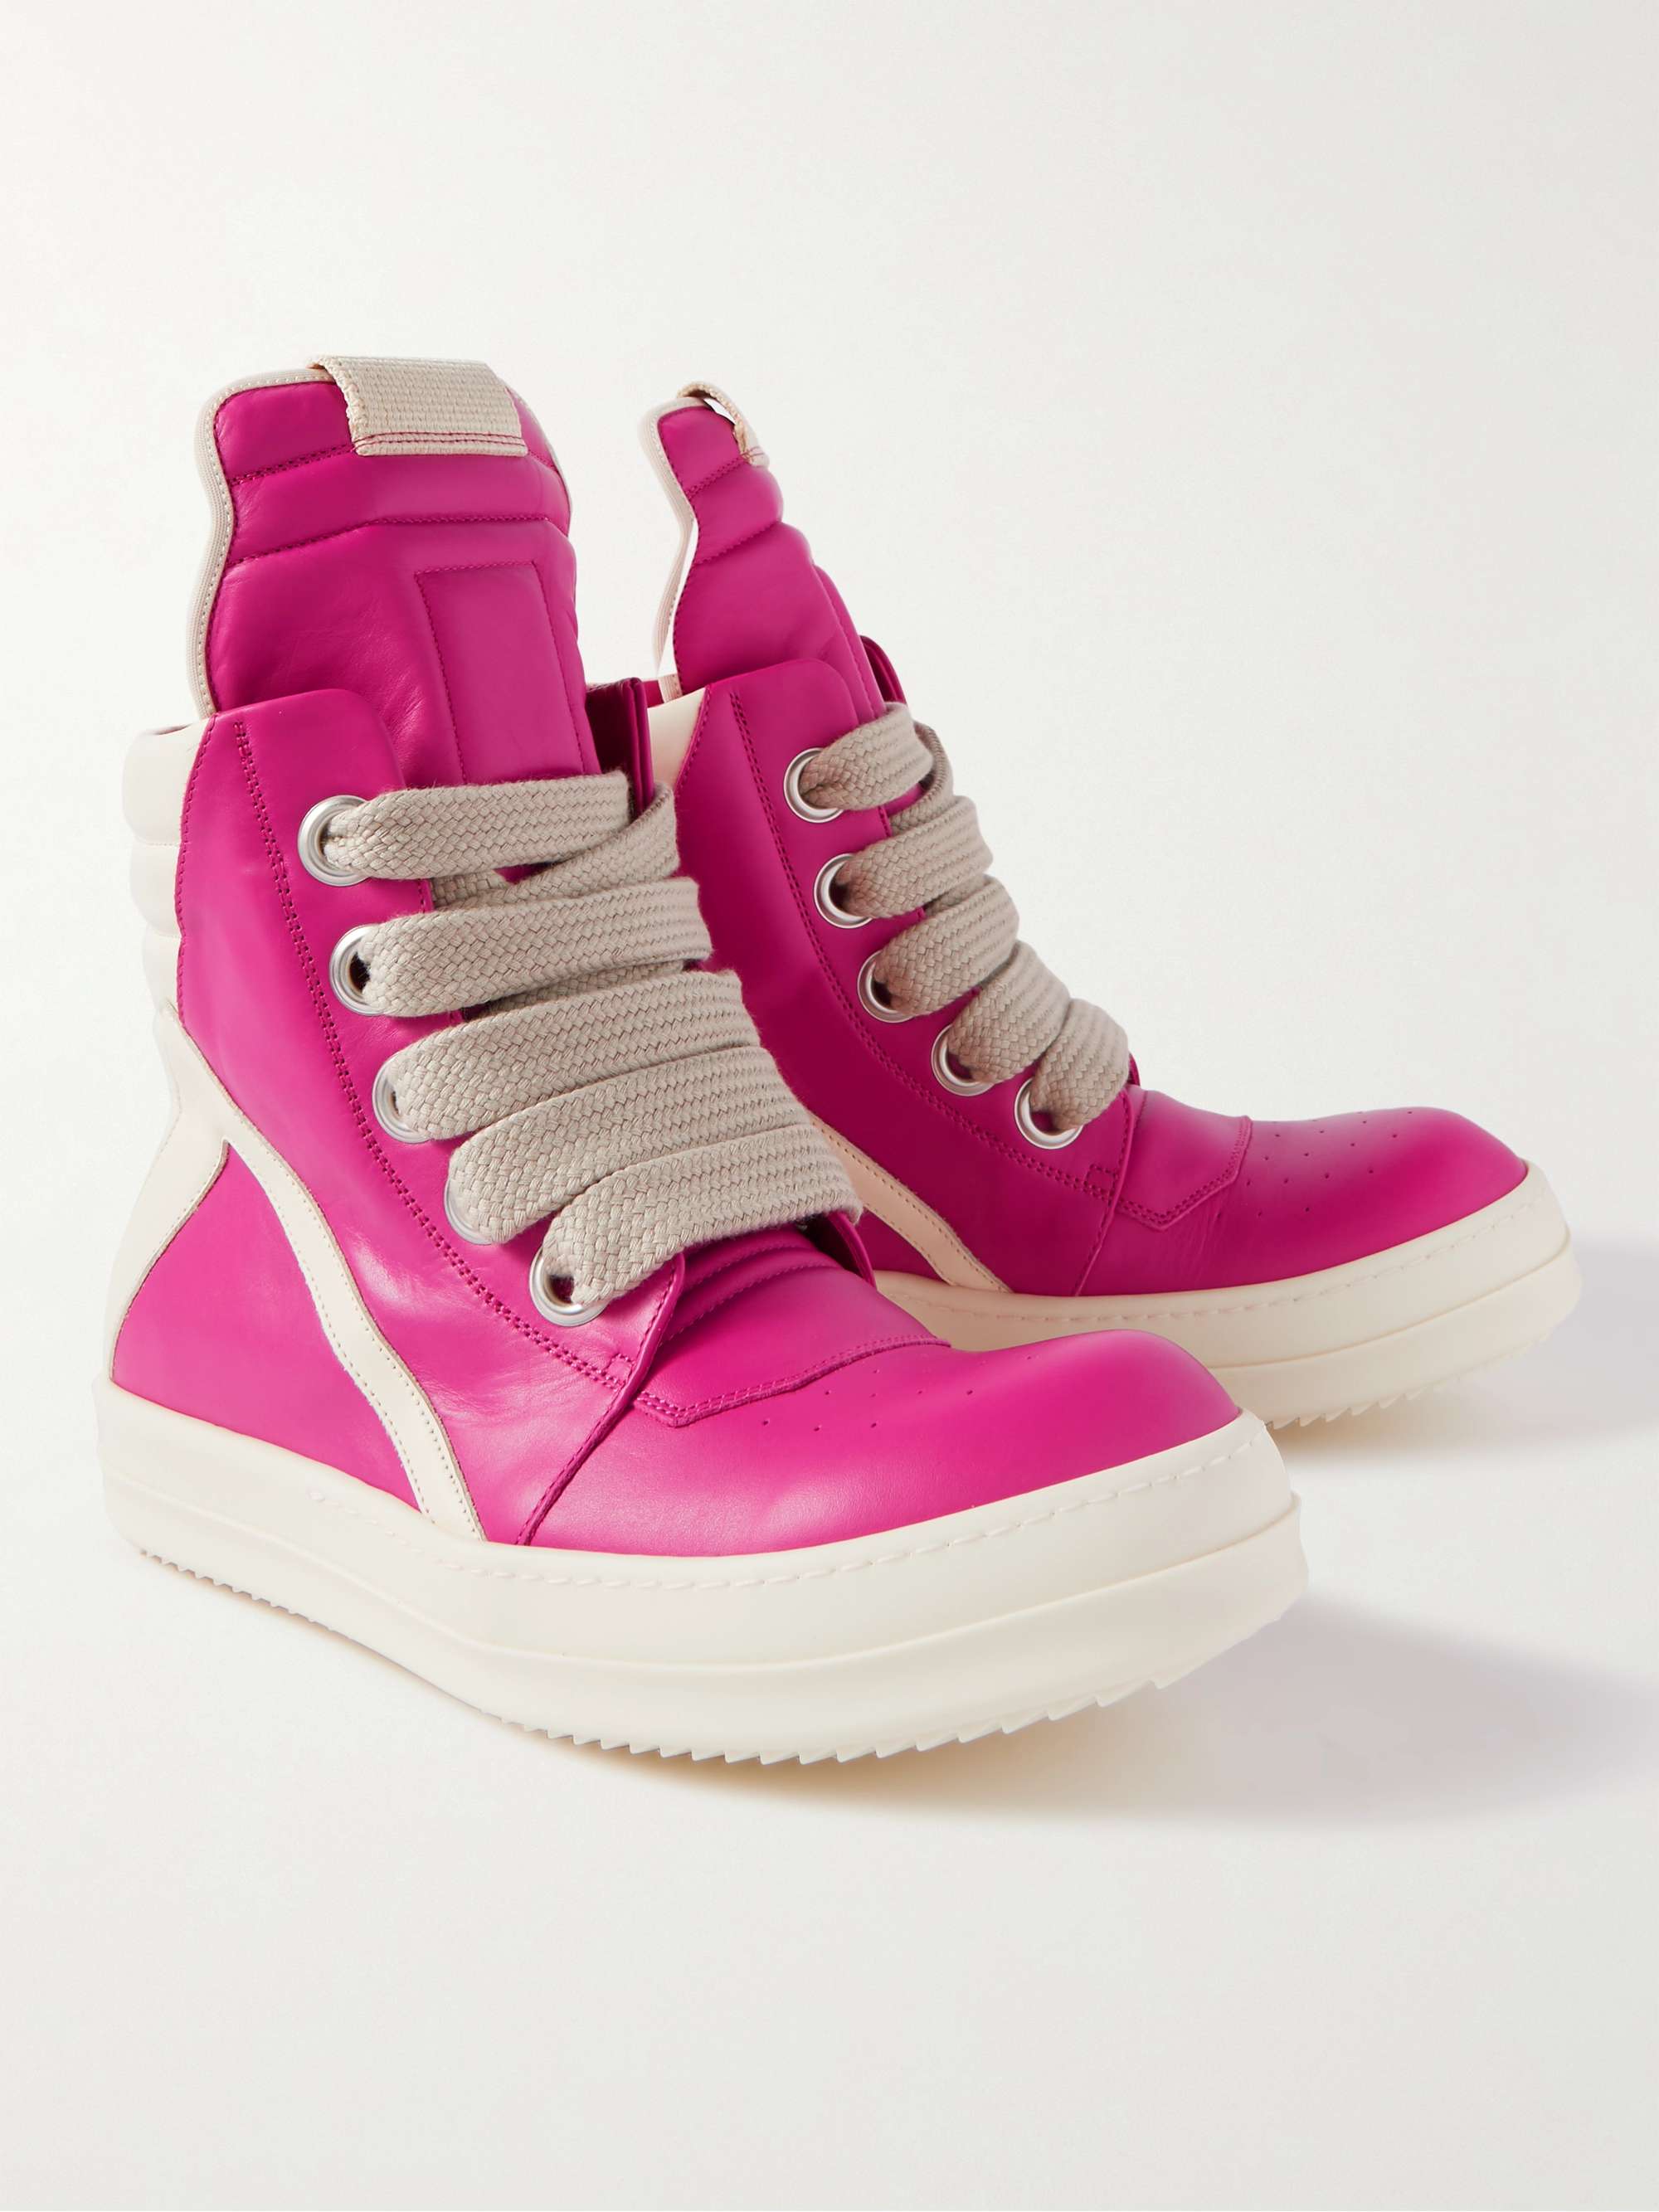 Pink Geobasket Two-Tone Leather High-Top Sneakers | RICK OWENS | MR PORTER